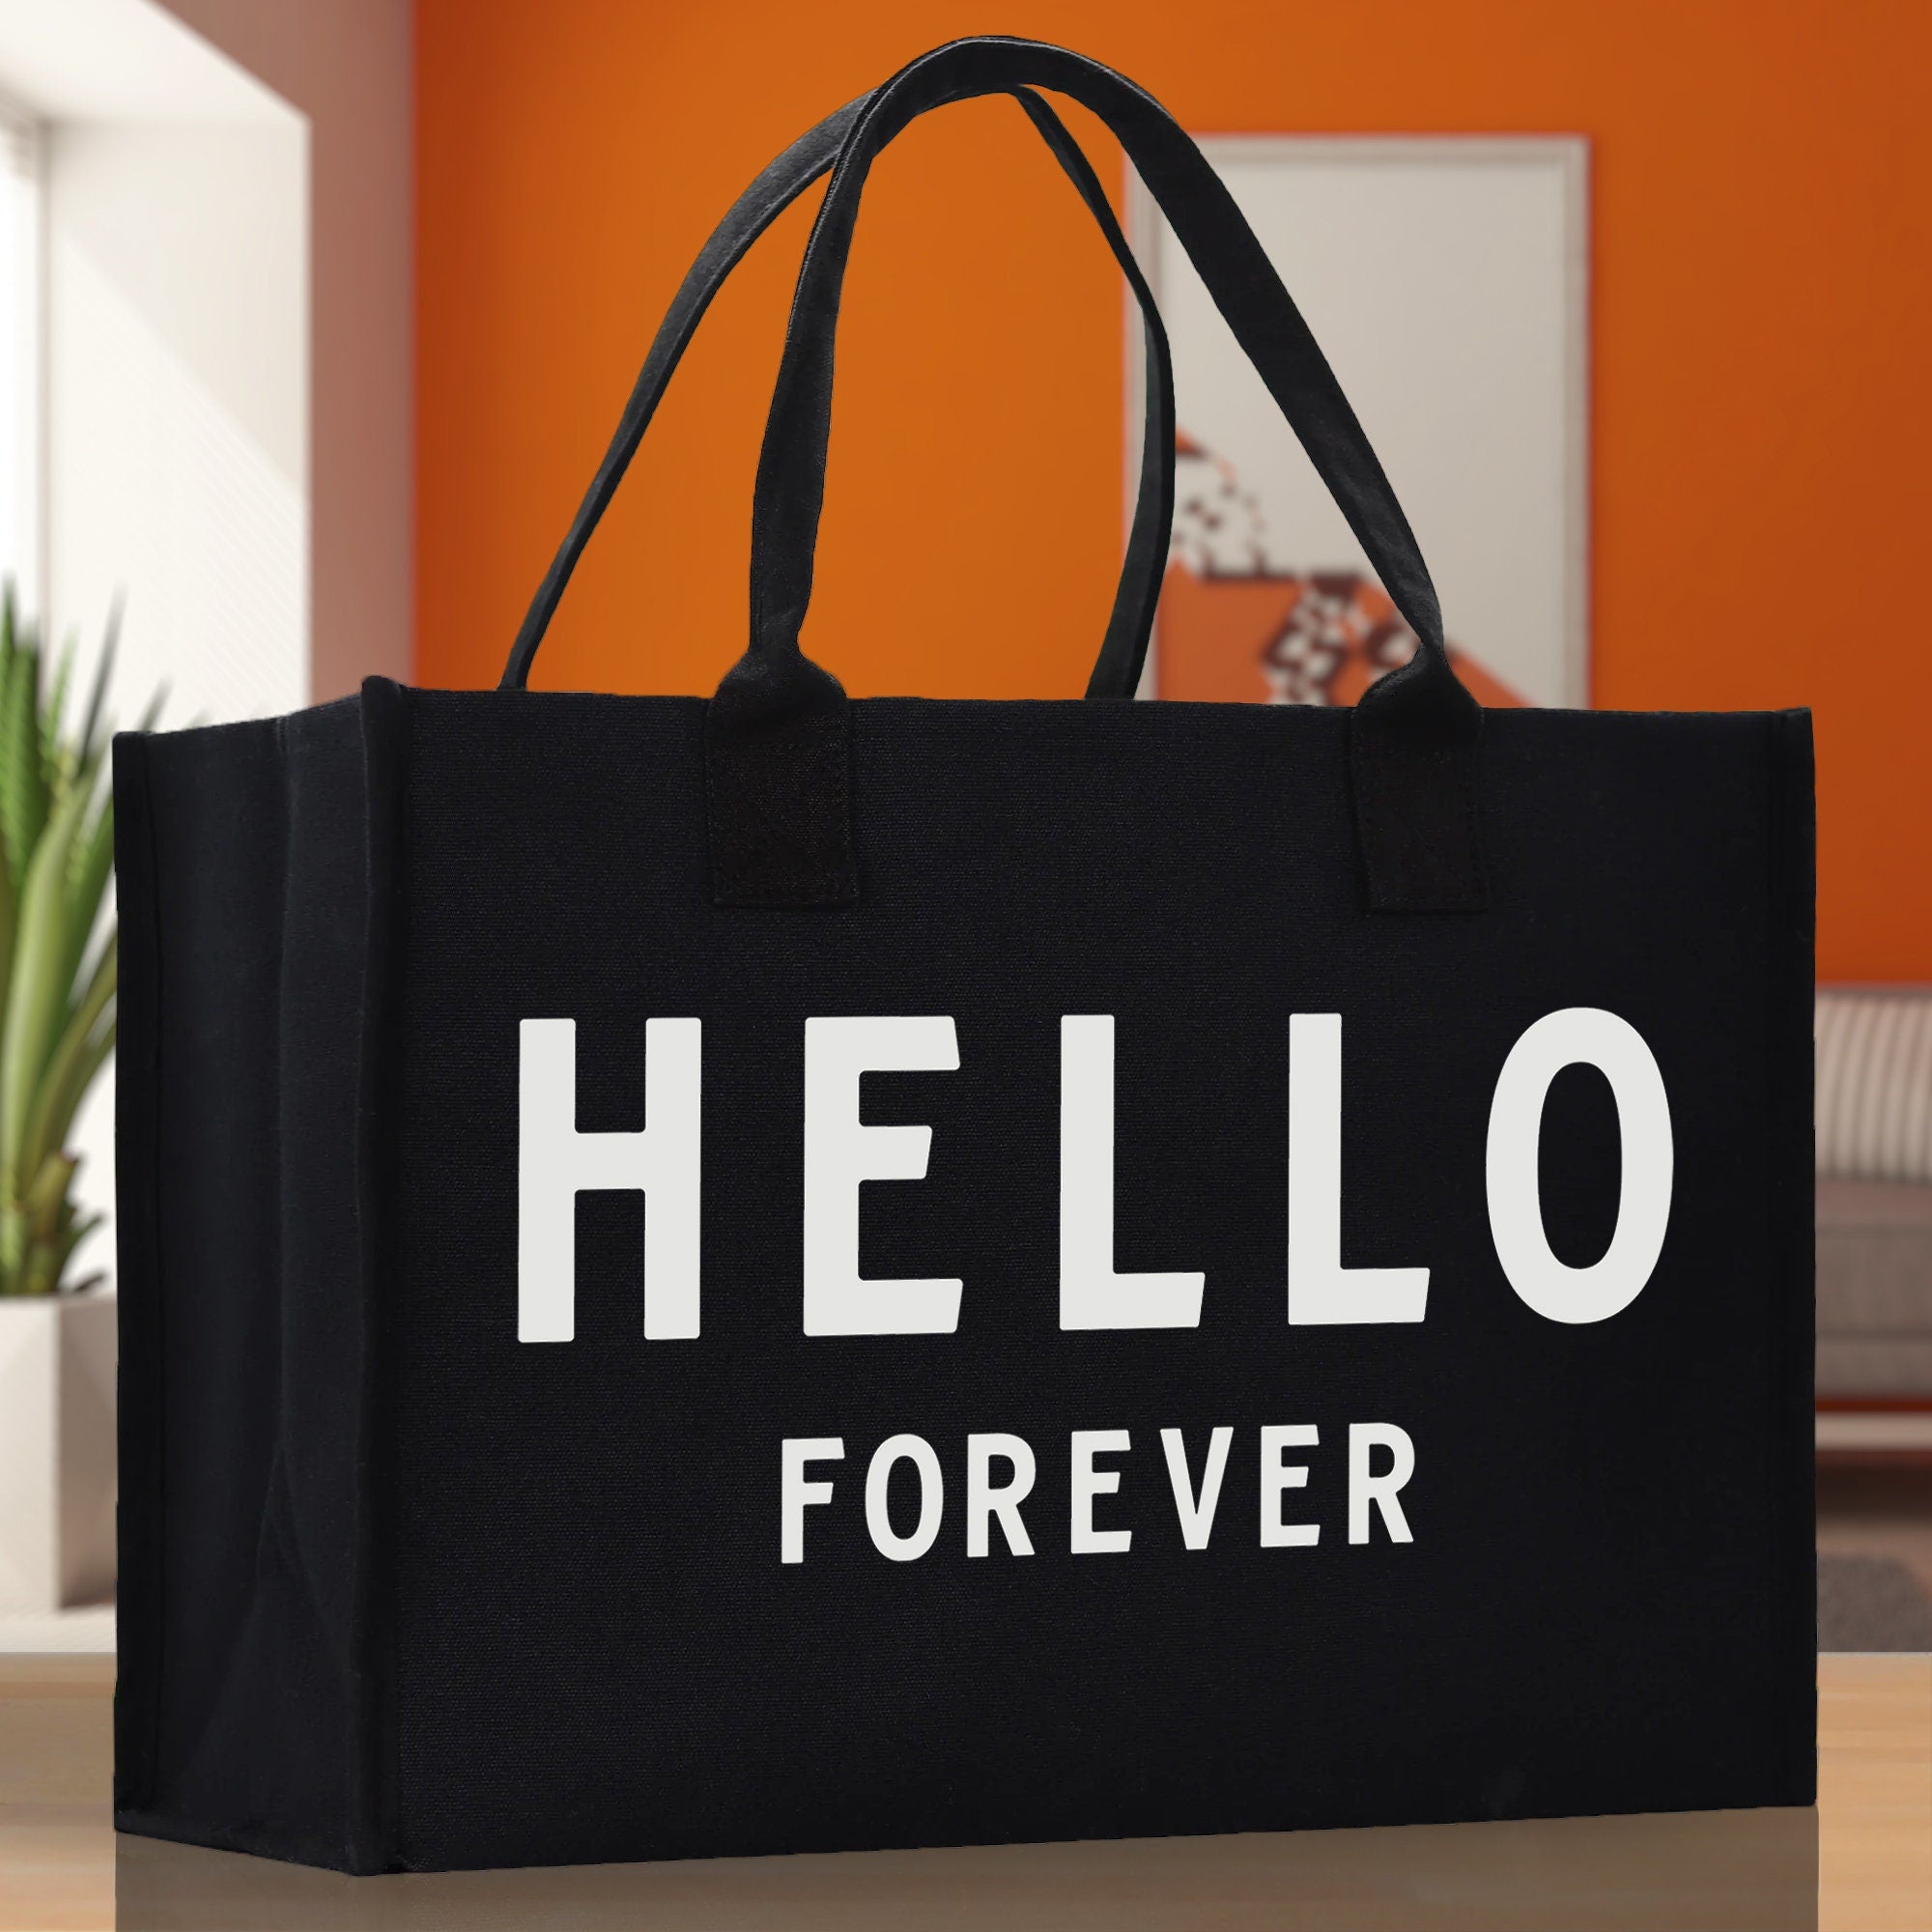 Hello Forever Cotton Canvas Chic Beach Tote Bag Multipurpose Tote Weekender Tote Gift for Her Outdoor Tote Vacation Tote Large Beach Bag